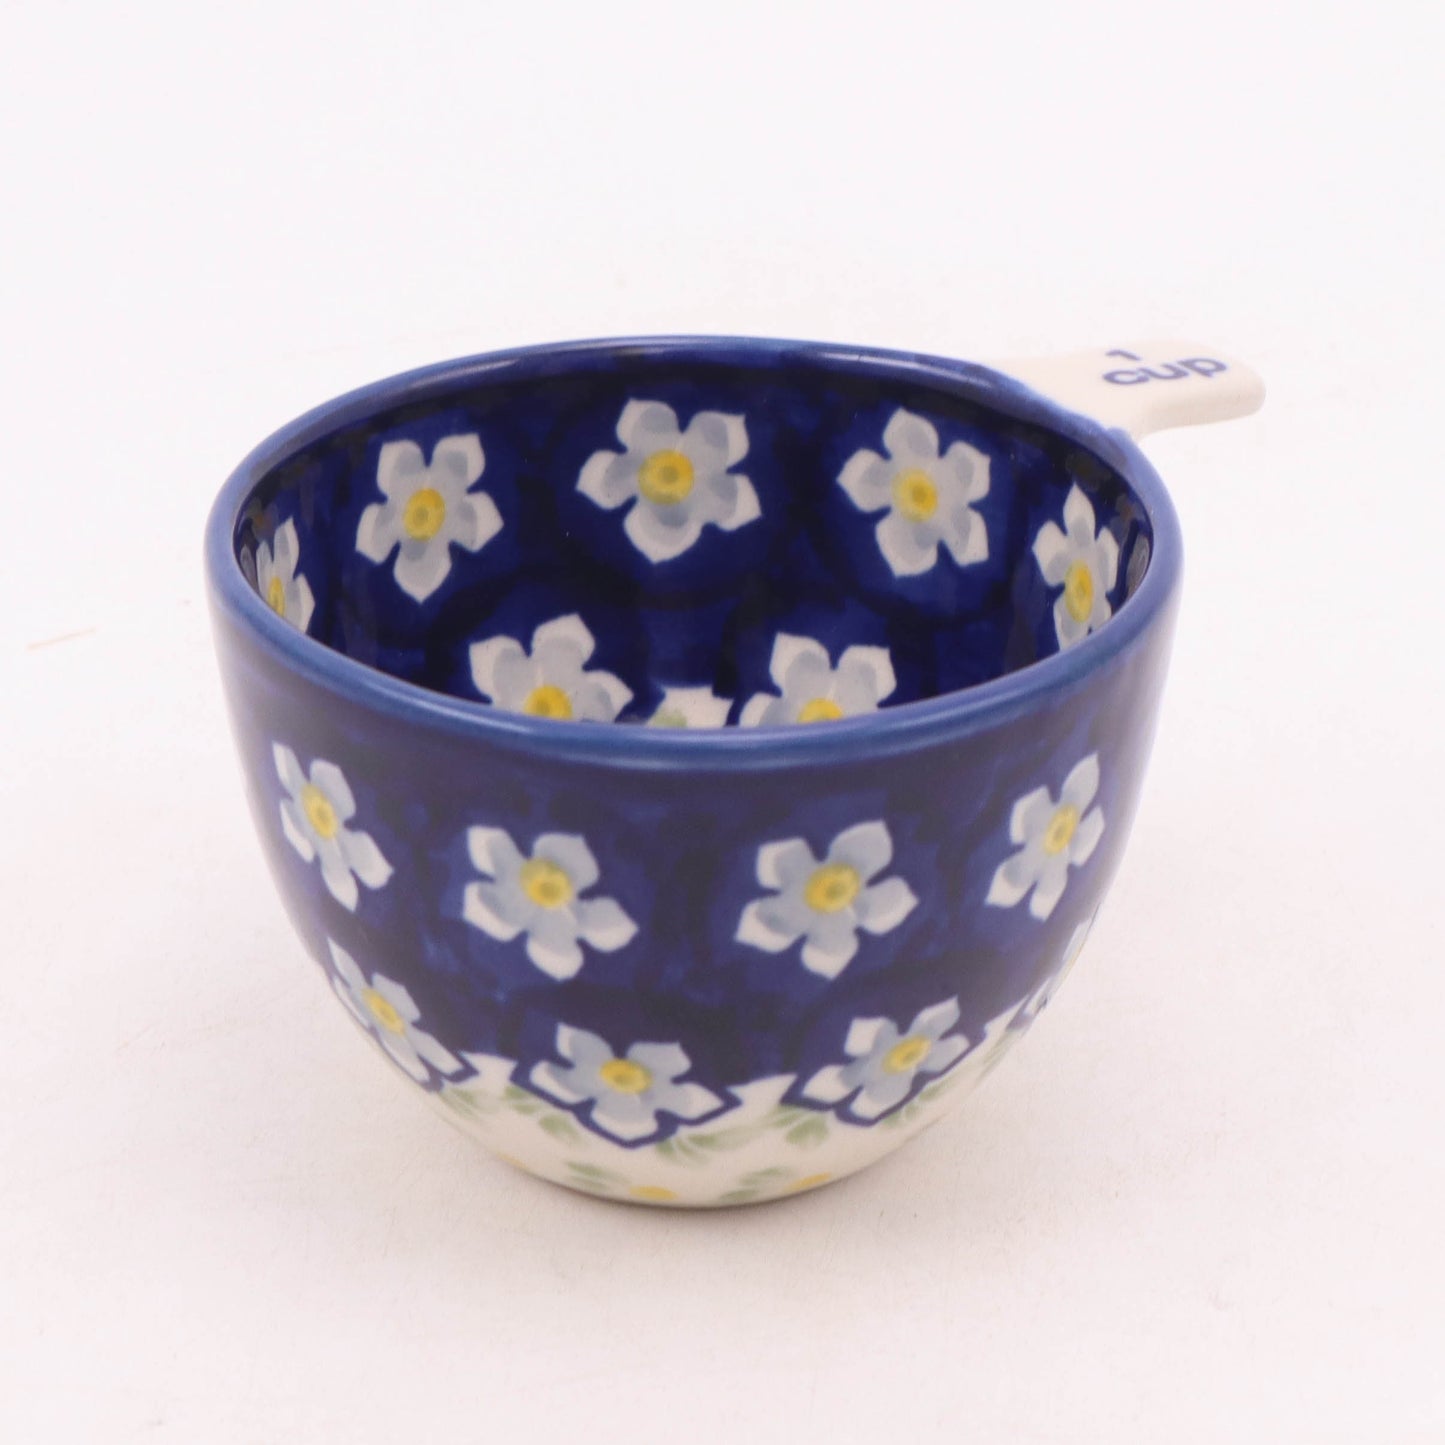 1 Cup Measuring Cup. Pattern: Forget Me Not